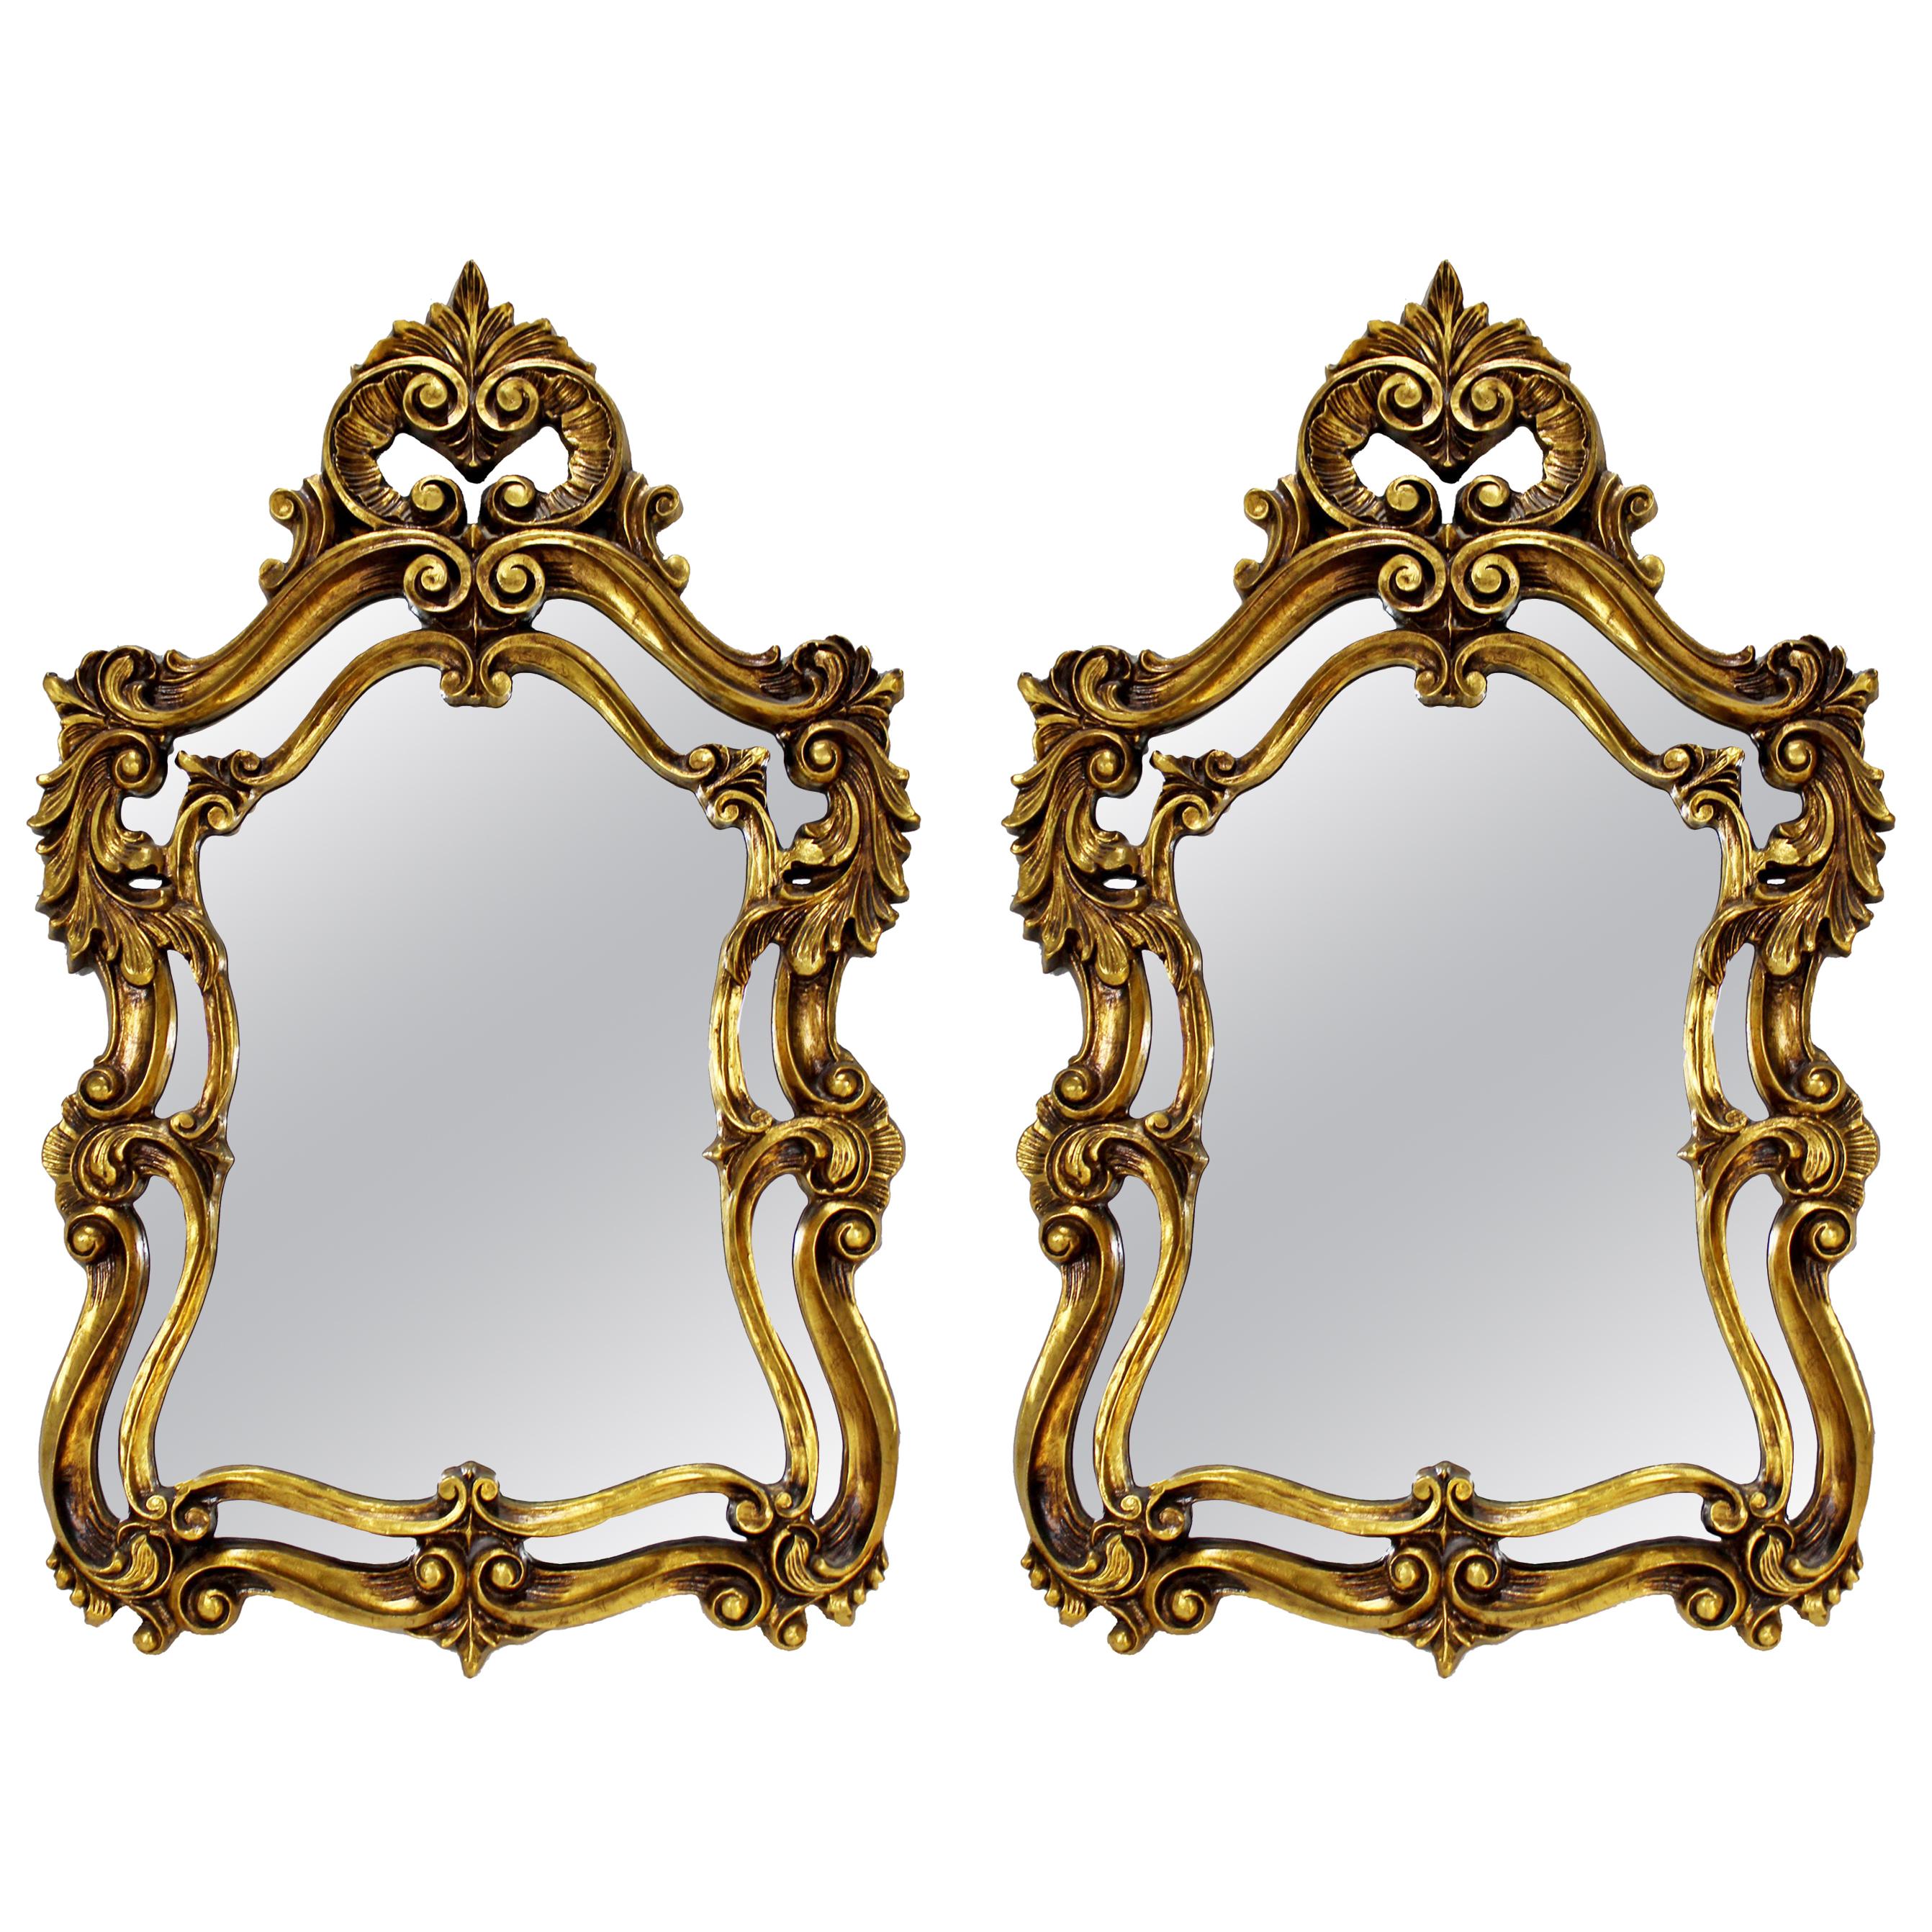 Pair of Rococo Hollywood Regency Style Gold Gilt Leaf Hanging Wall Mirrors